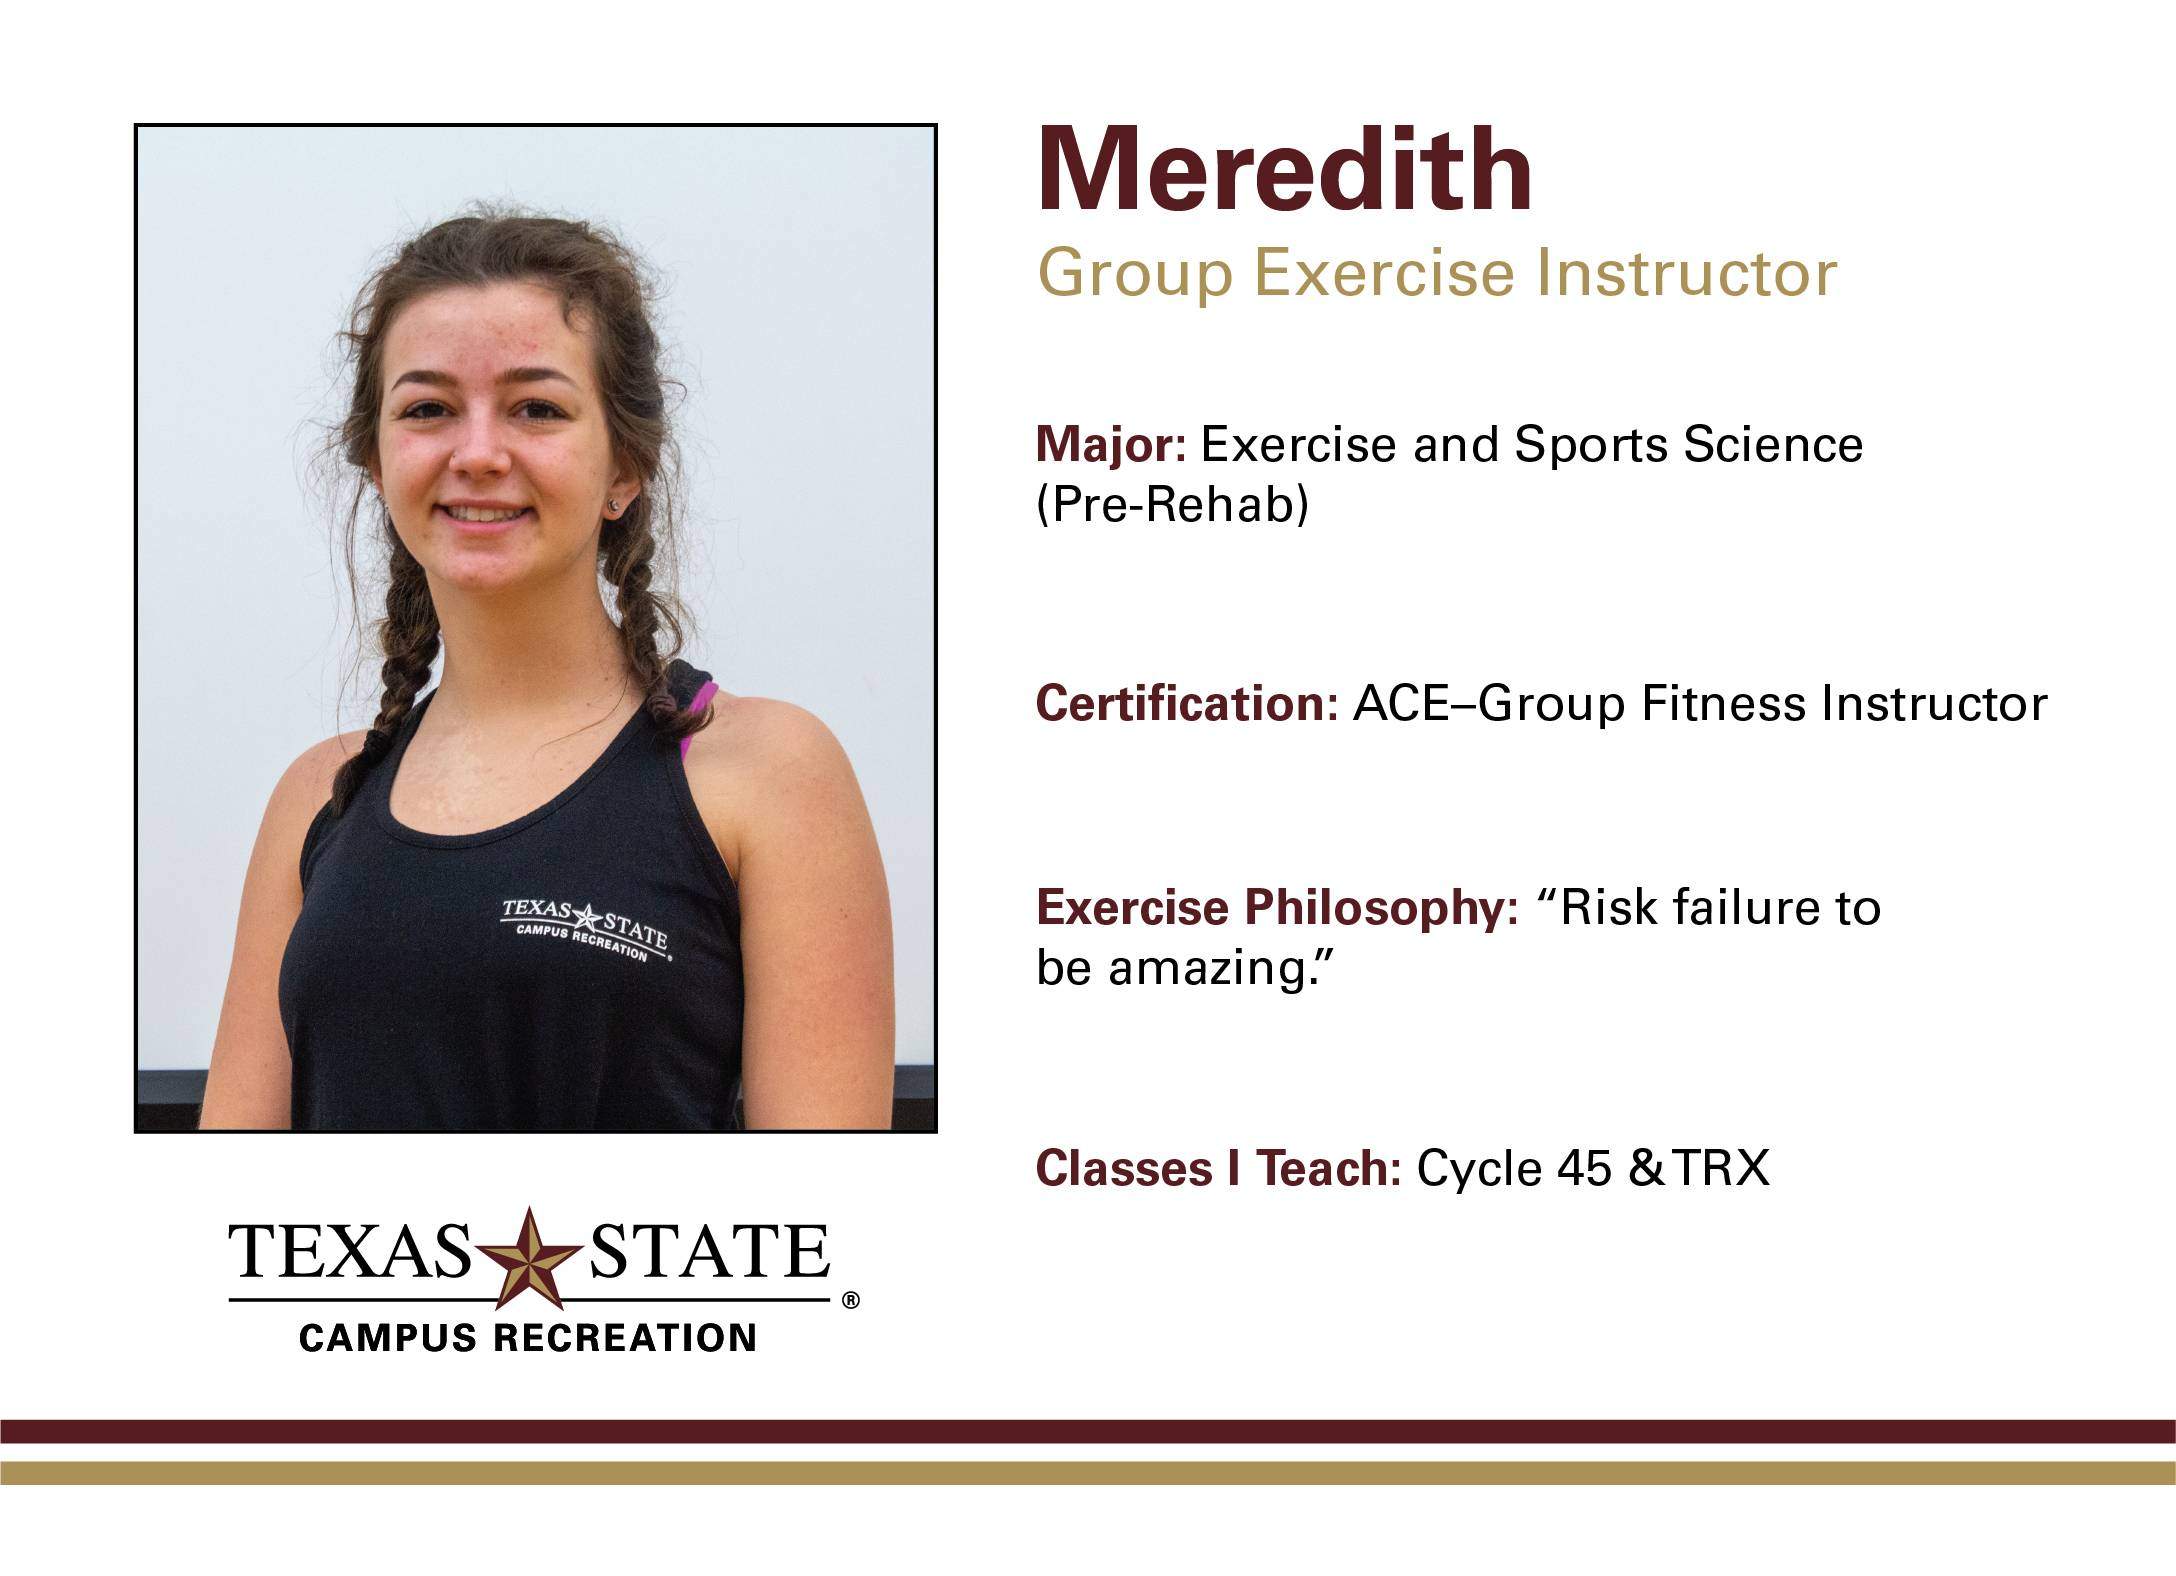 This is a bio of Meredith a group instructor at Texas State